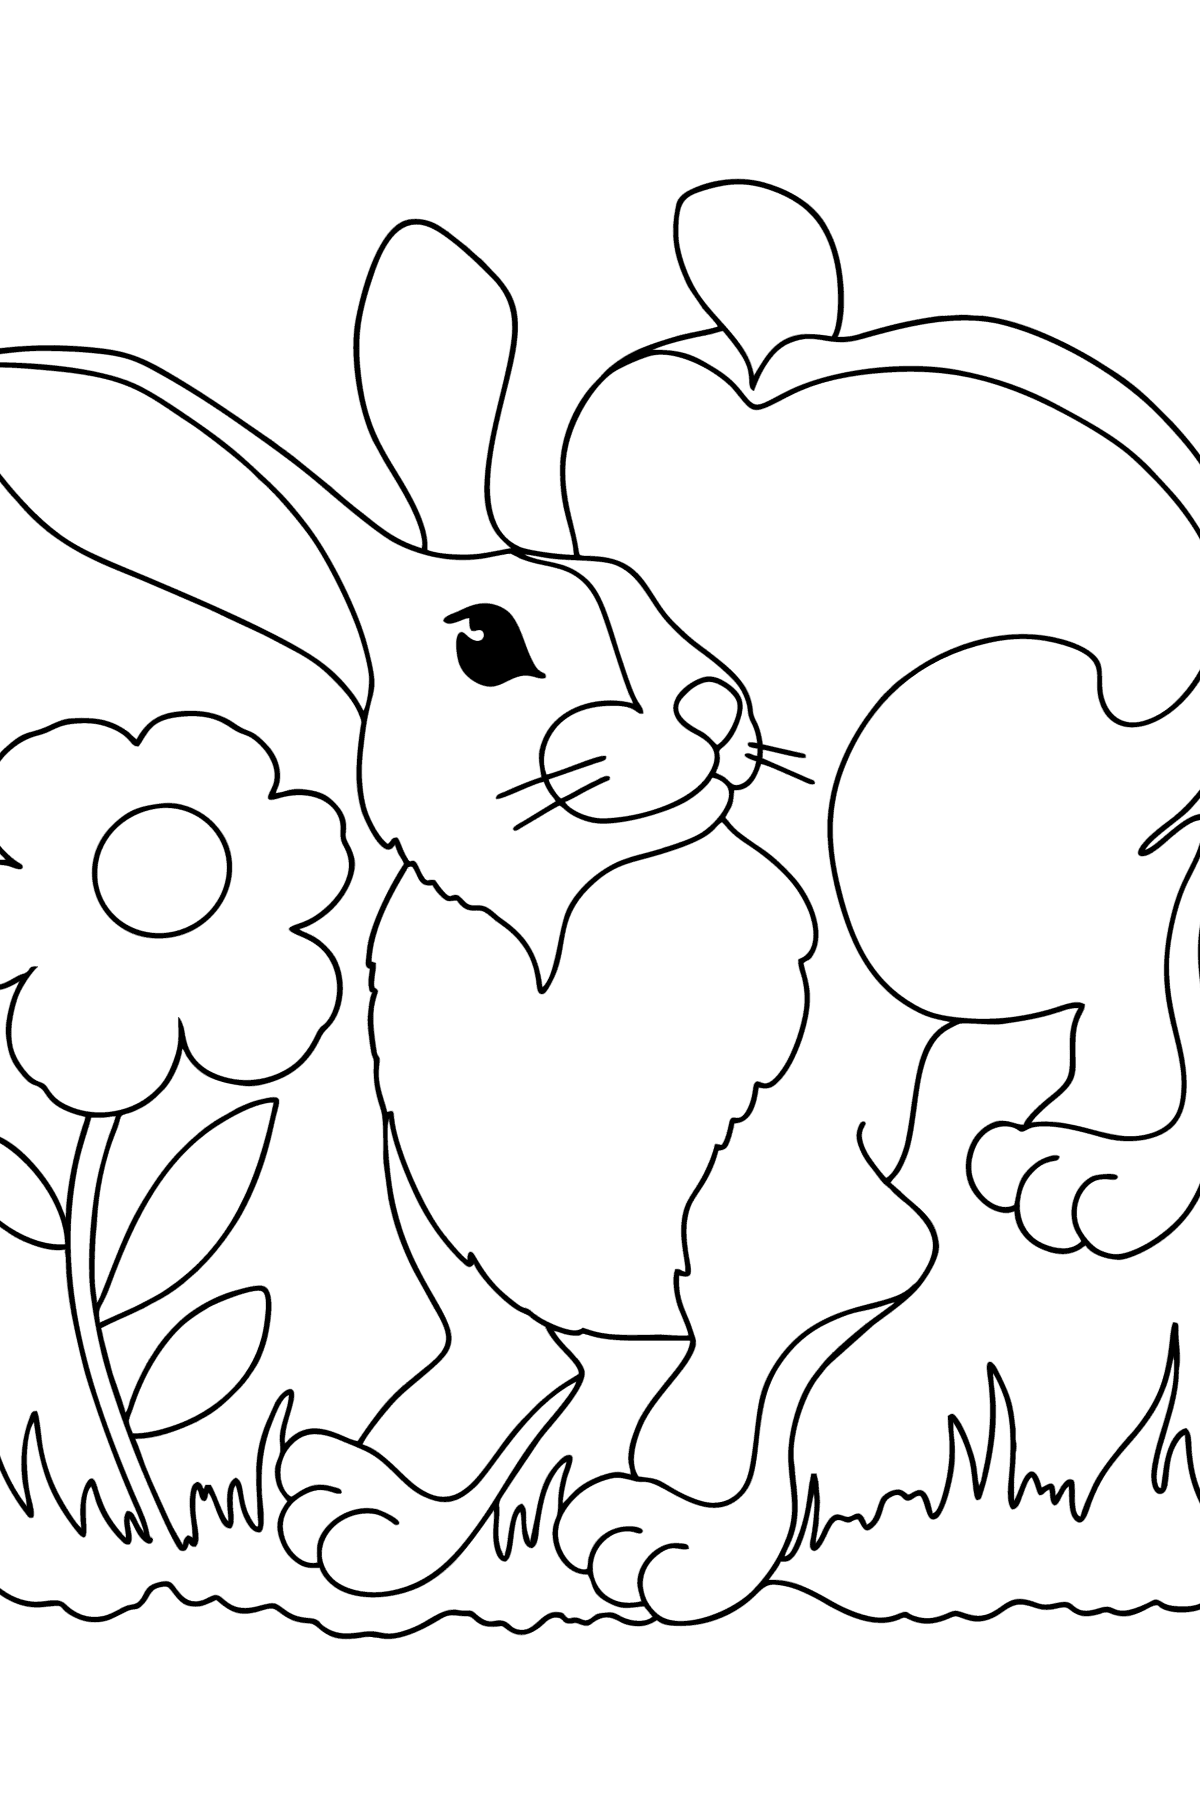 Cute Rabbit coloring page - Coloring Pages for Kids